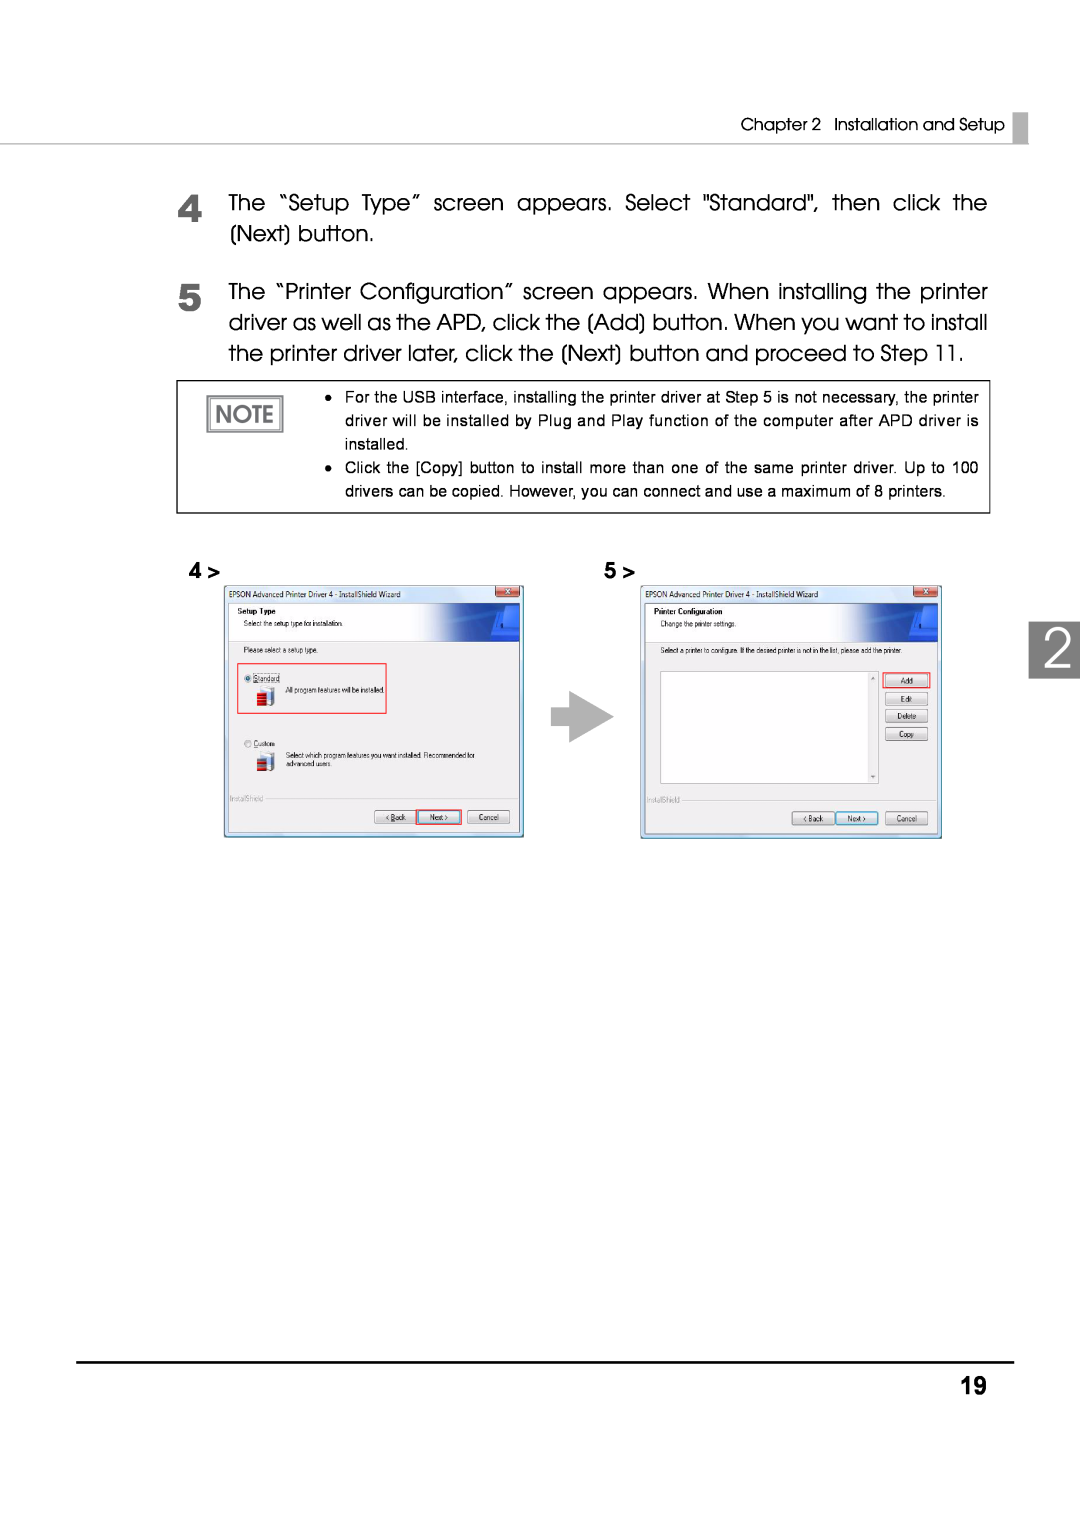 Epson M00002104 install manual The “Setup Type” screen appears. Select Standard, then click the Next button 